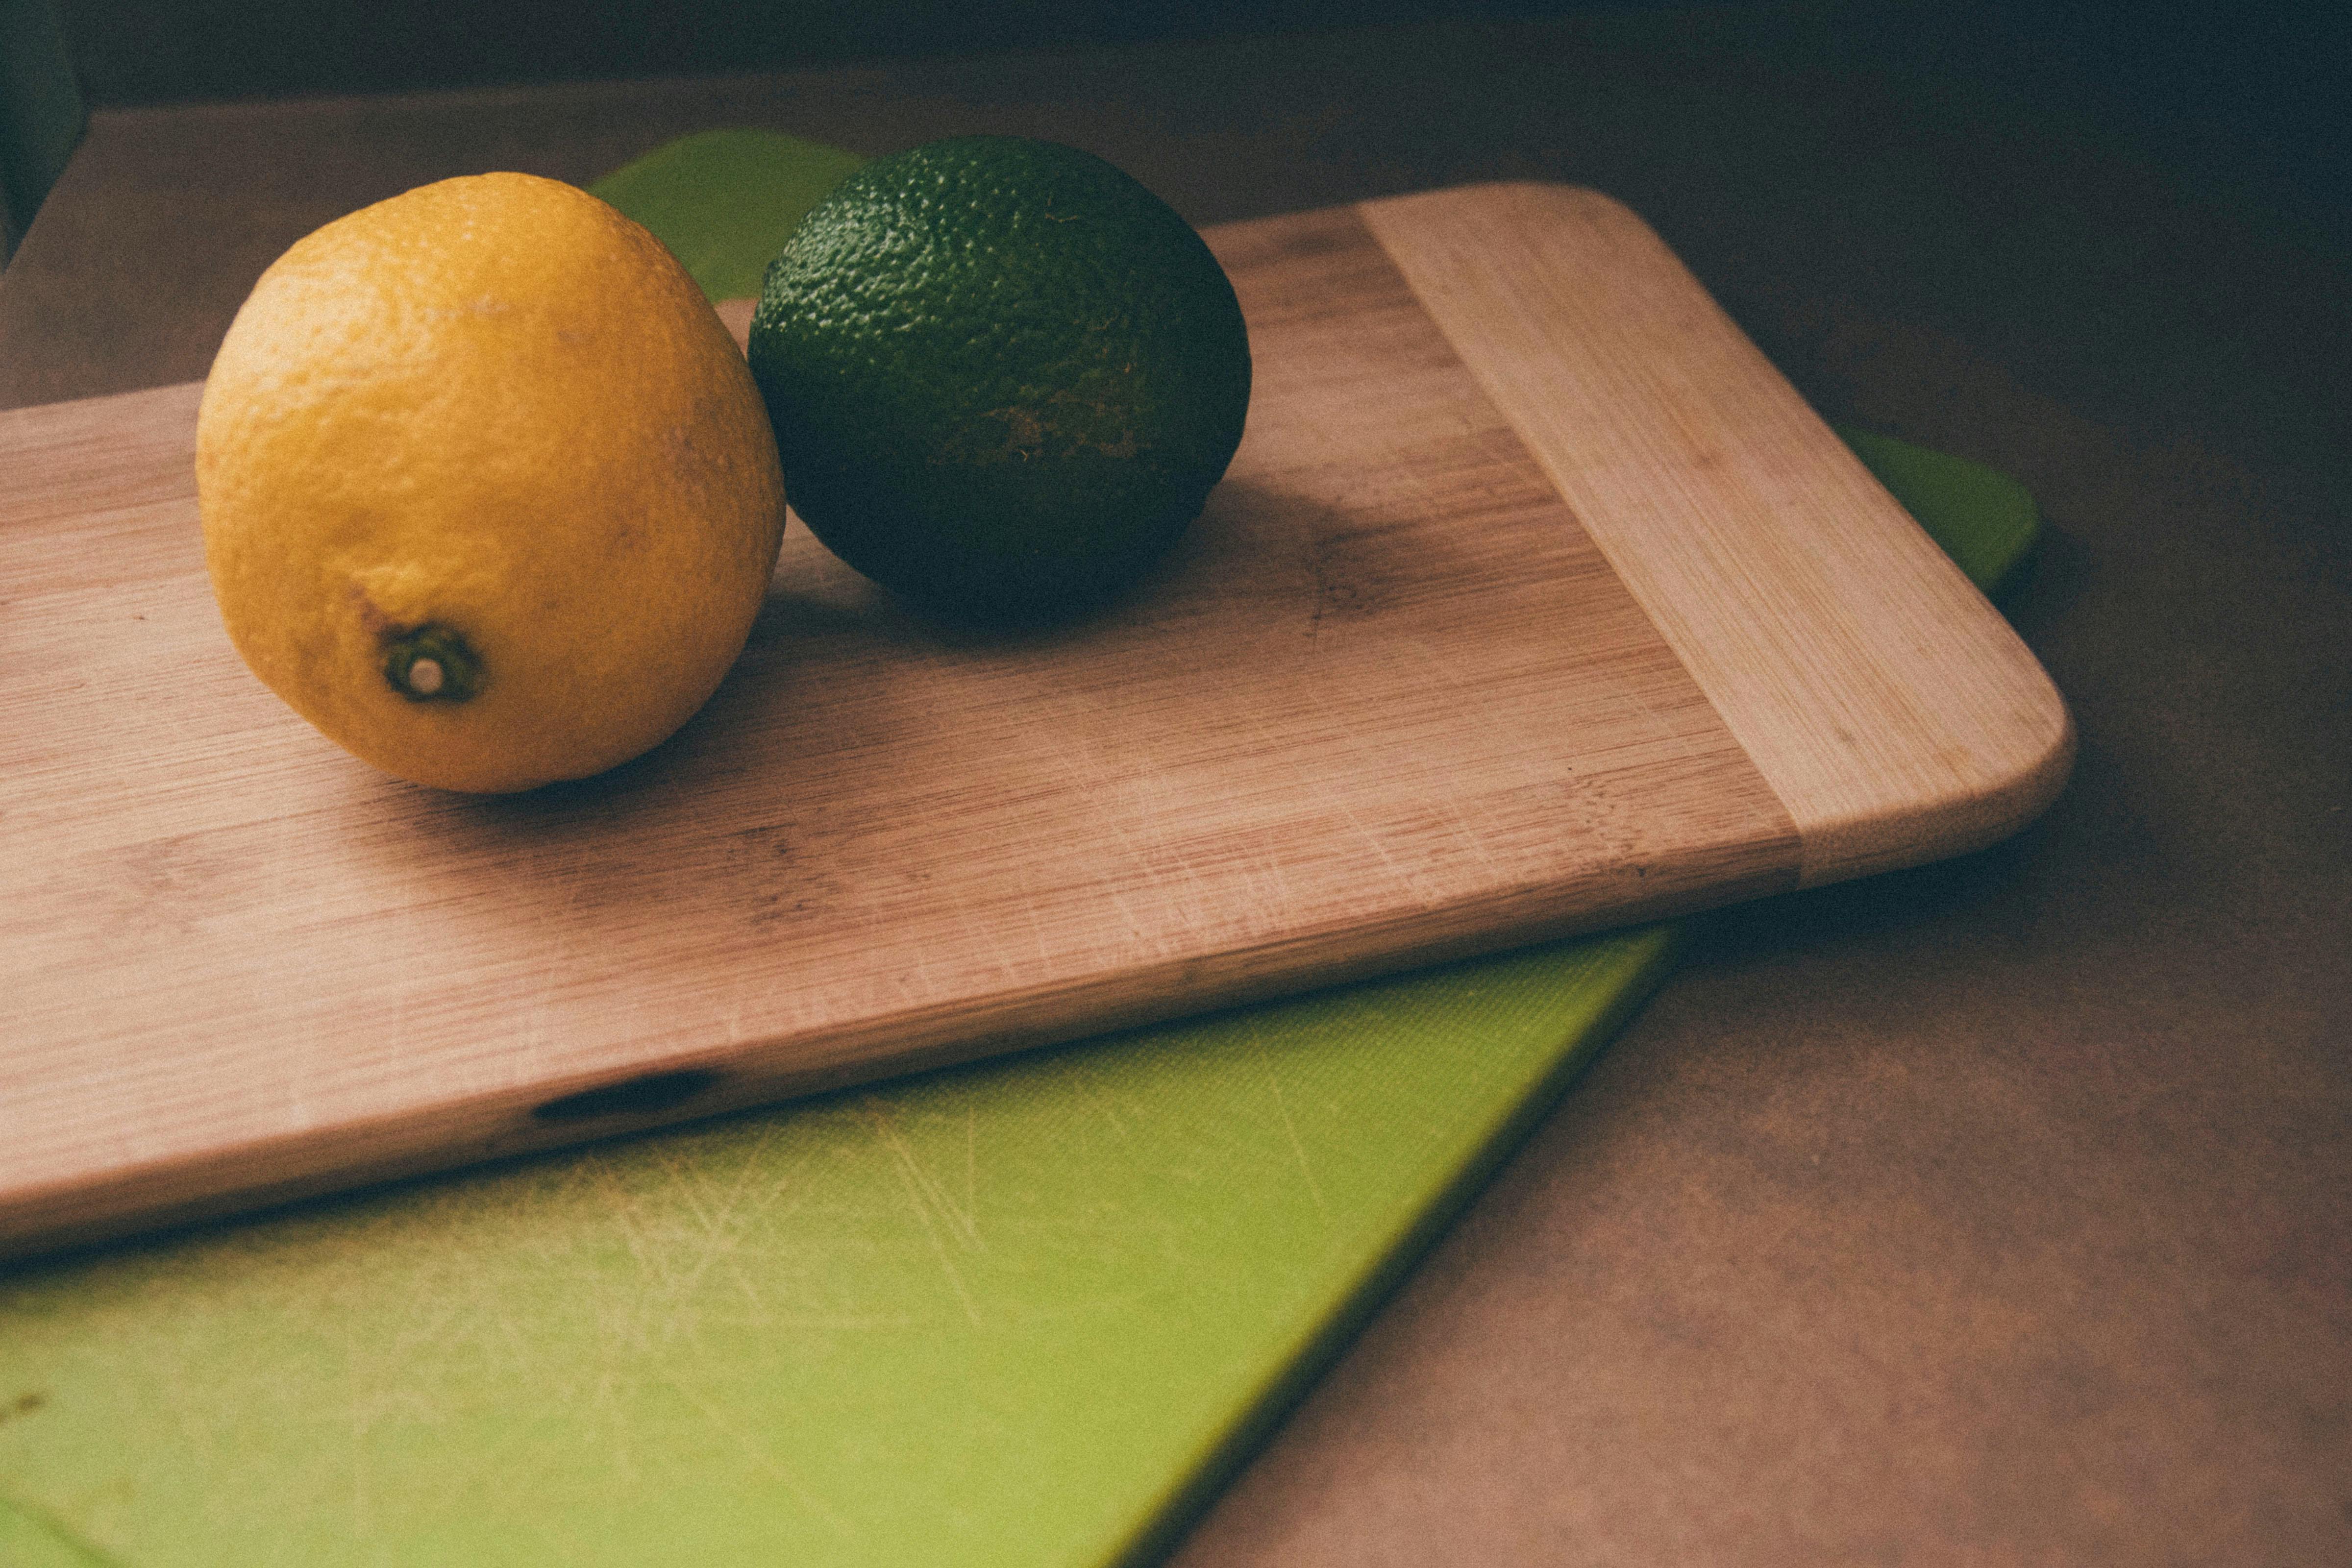 Best Meat Cutting Board: Material and Design Features to Look For